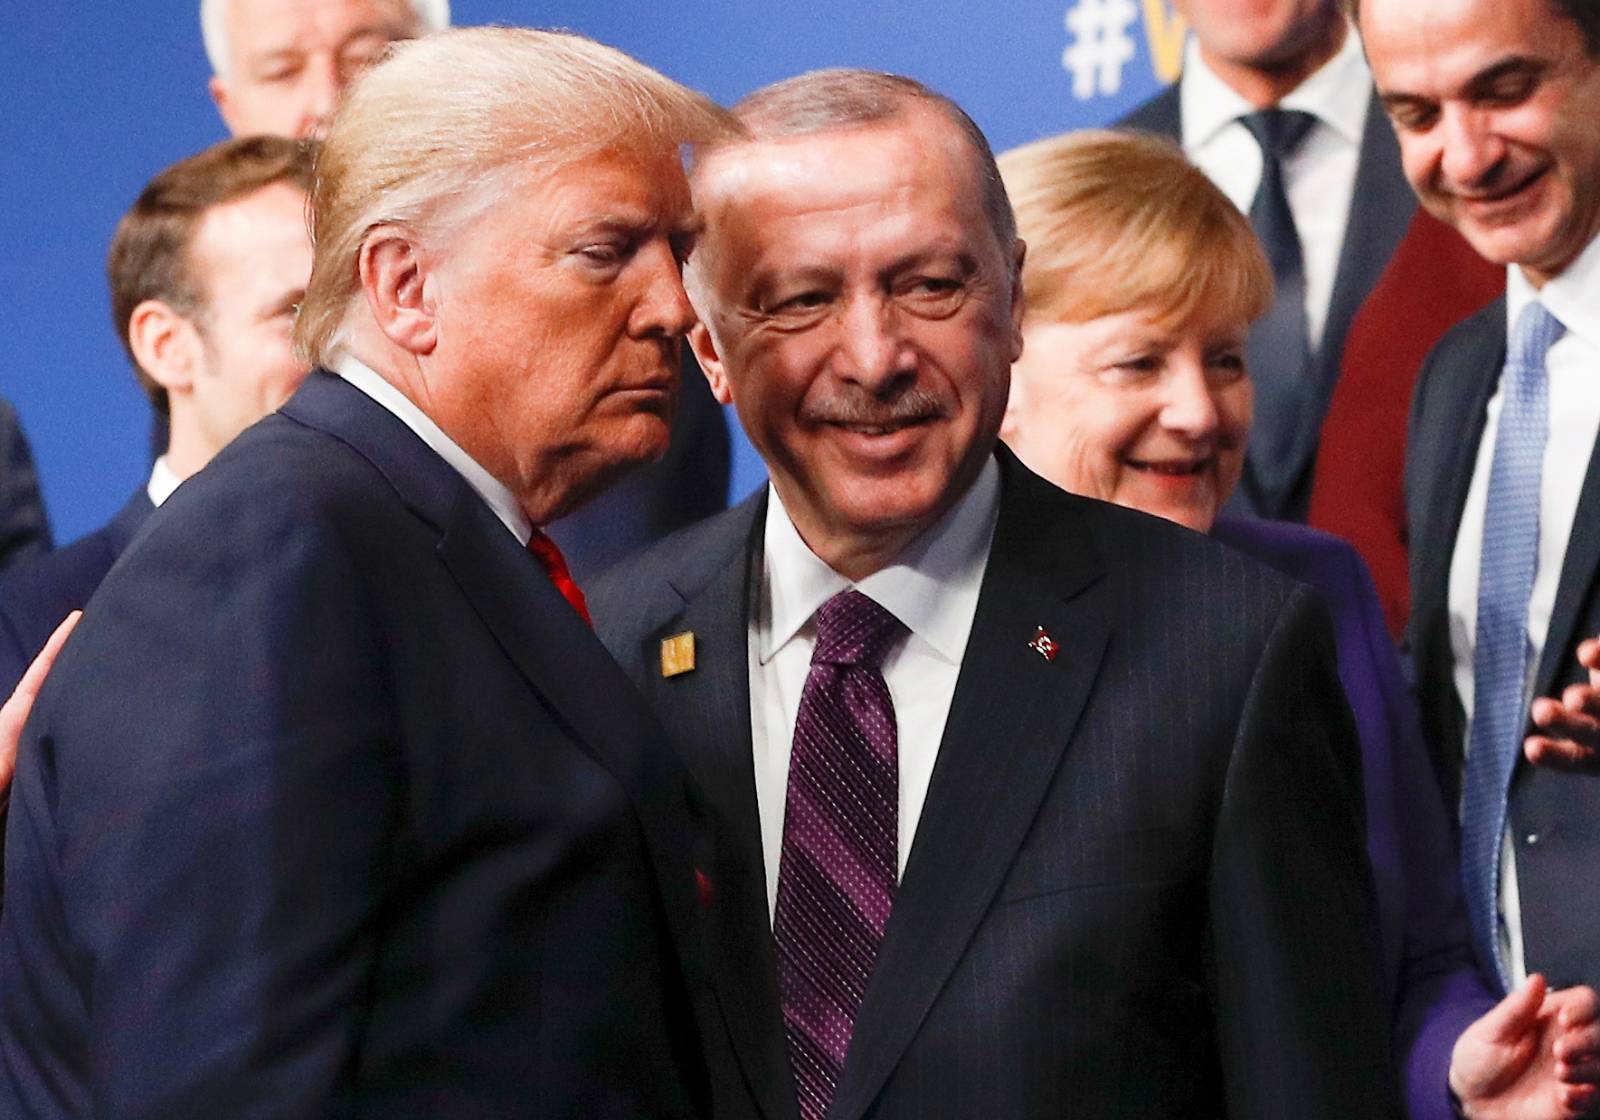 FILE PHOTO: U.S. President Donald Trump and Turkish President Recep Tayyip Erdogan leave the stage after a family photo during the NATO NATO summit in Watford, Britain